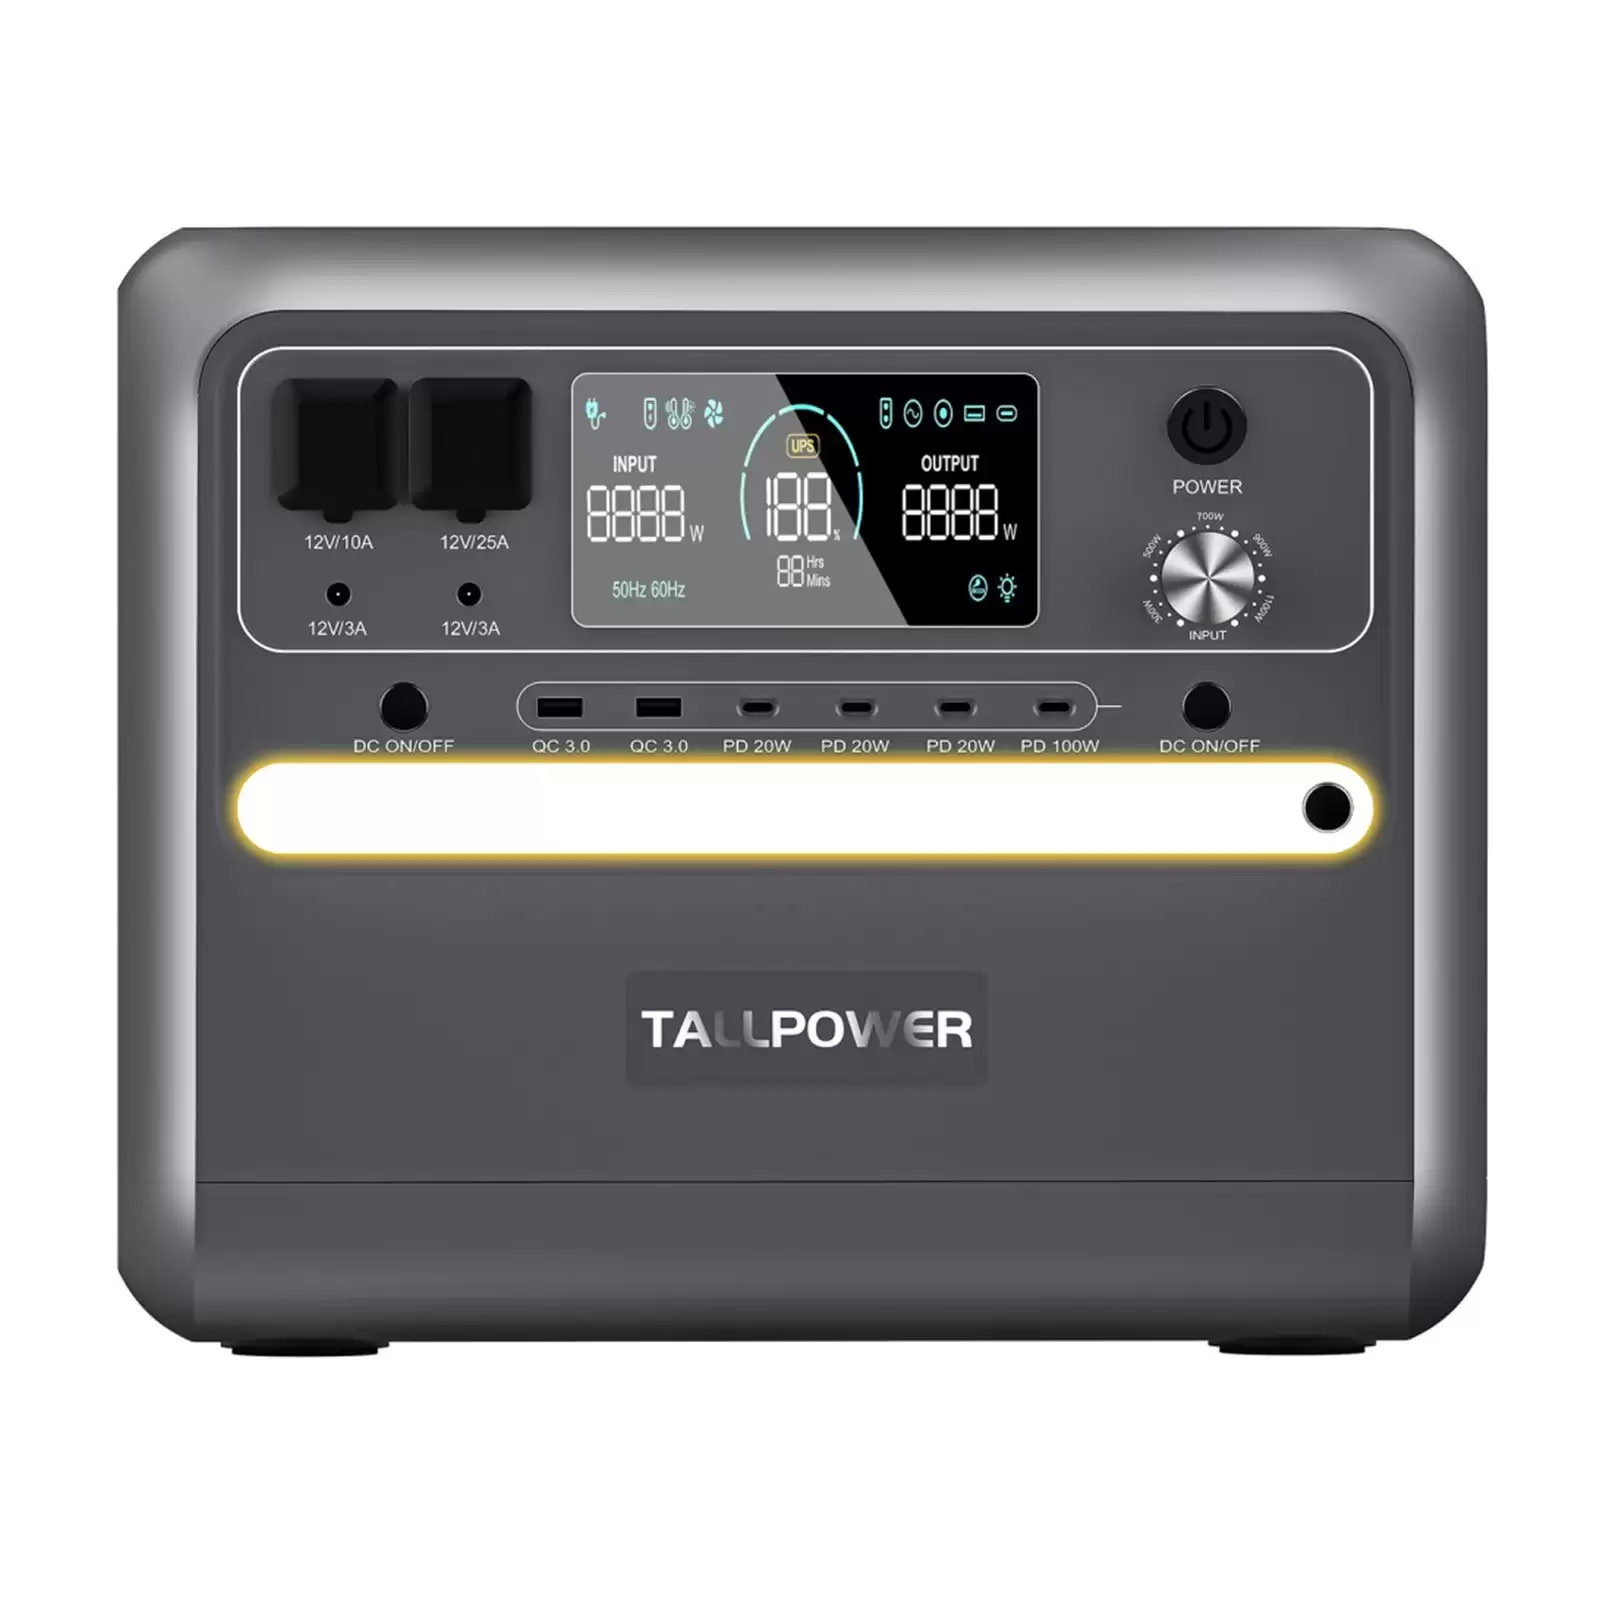 Order In Just €769 [Eu Warehouse] Tallpower V2400 Portable Power Station 2160wh Lifepo4 Solar Generator At Tomtop